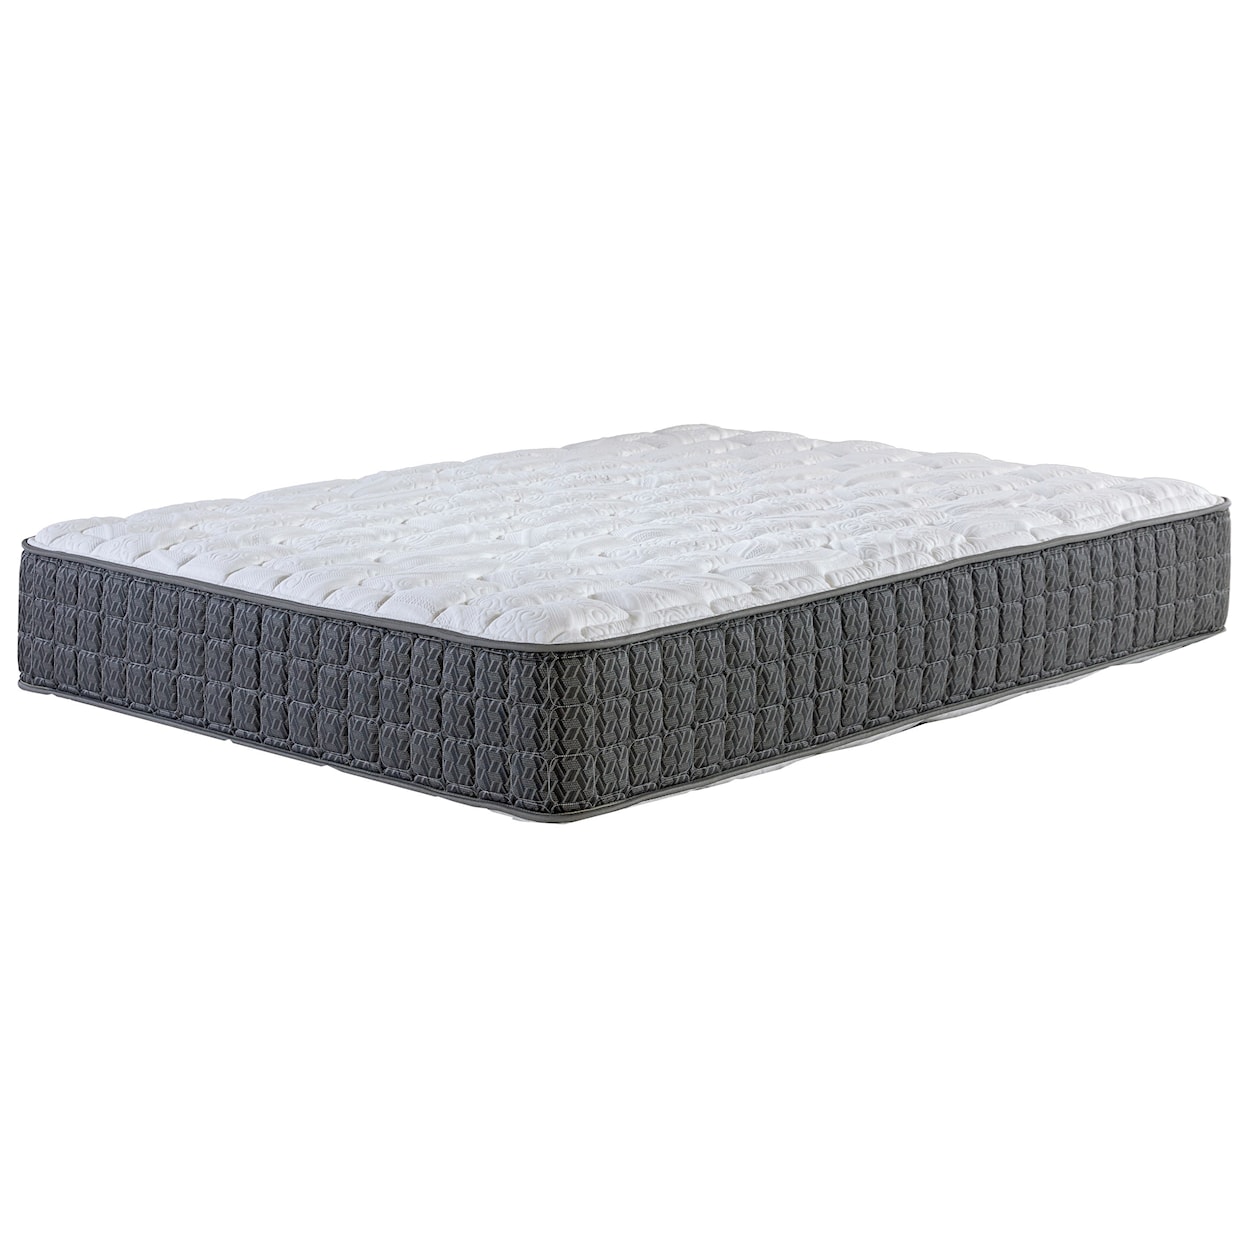 Corsicana Rossington Firm Cal King Firm Two Sided Mattress